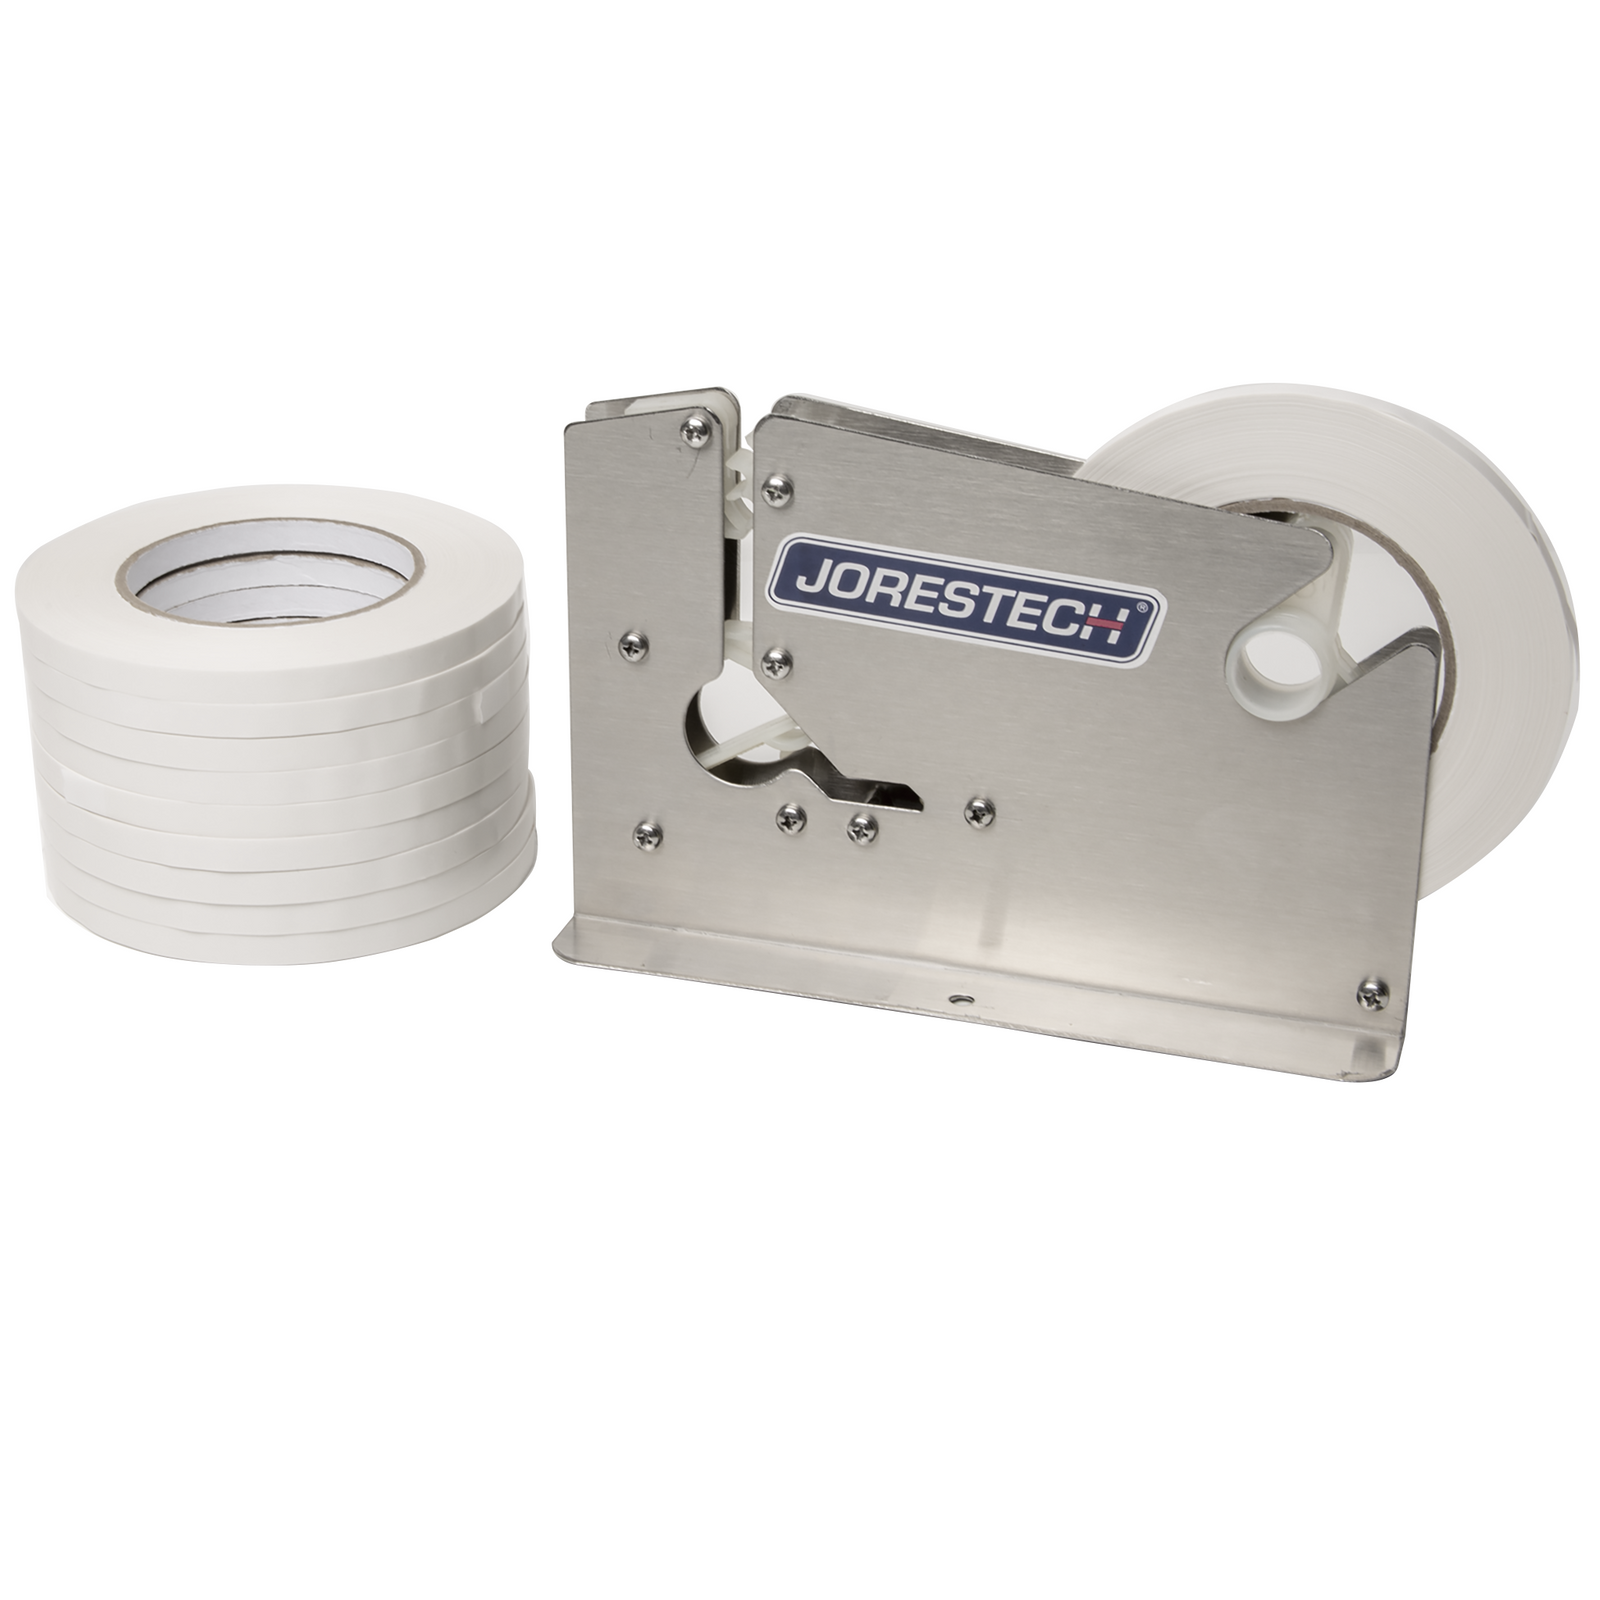 A stainless steel bag closer next to 10 adhesive white tape rolls